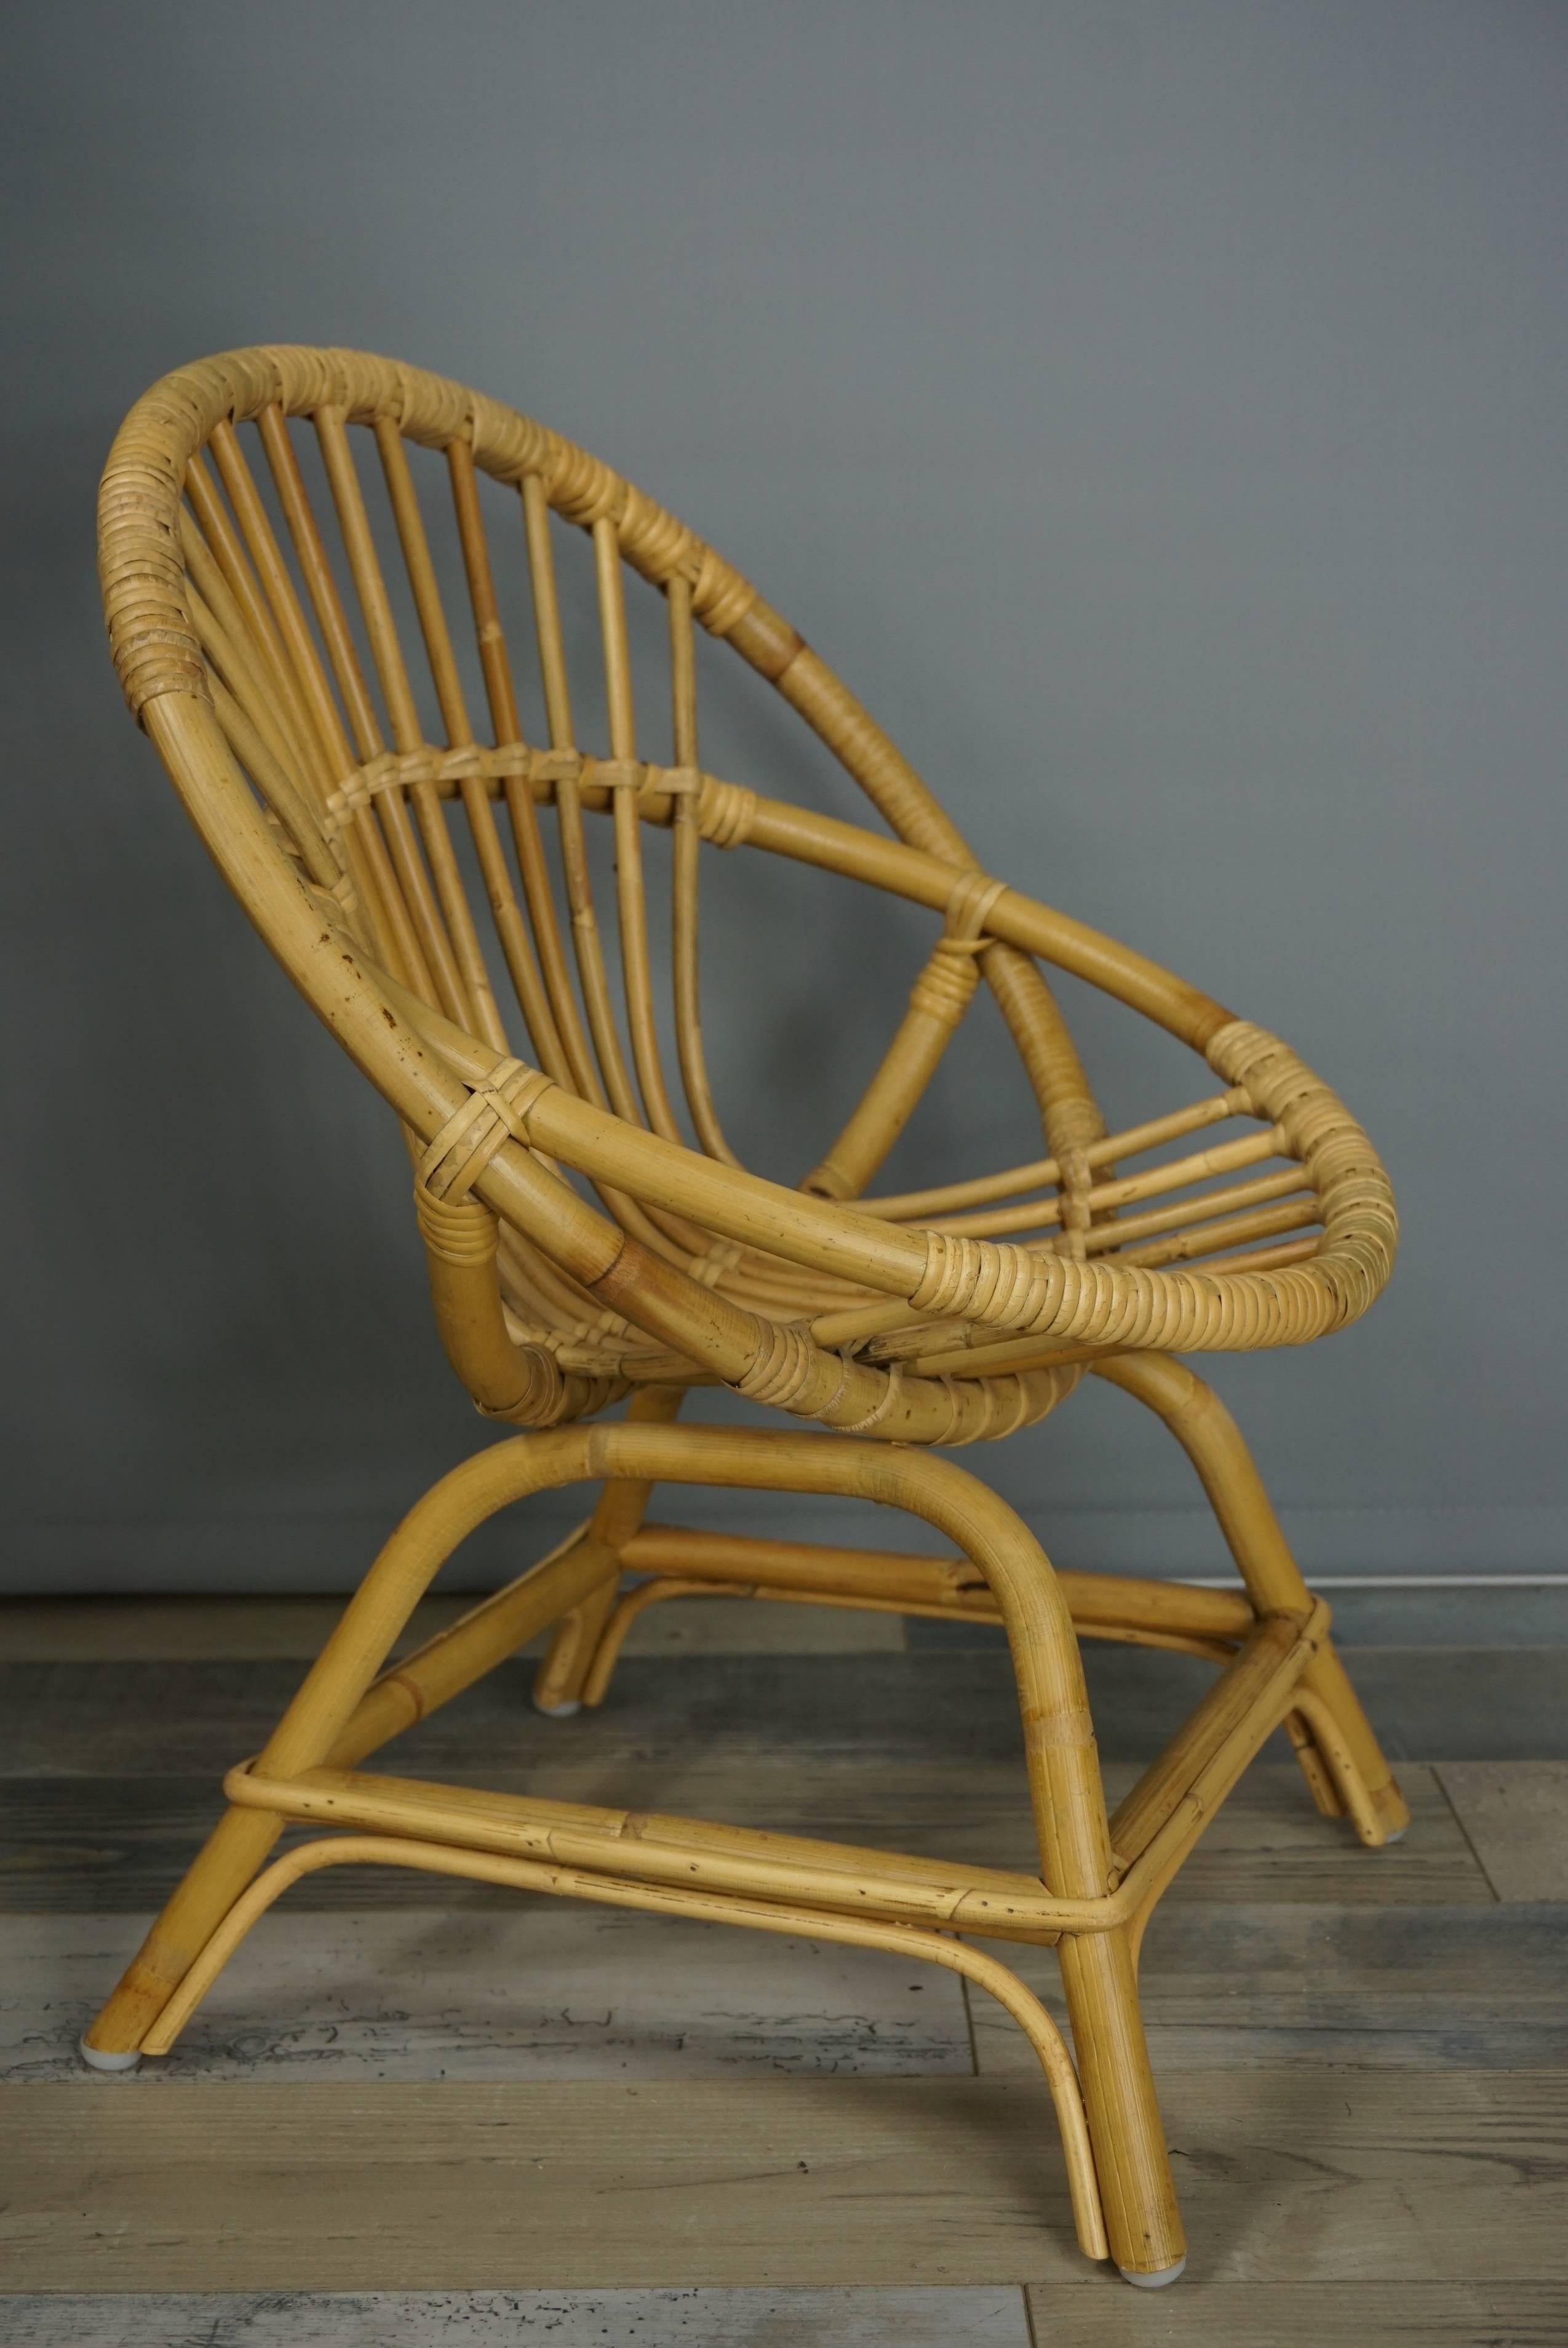 Armchair in Natural Rattan Cane excellent quality

Seat height 43